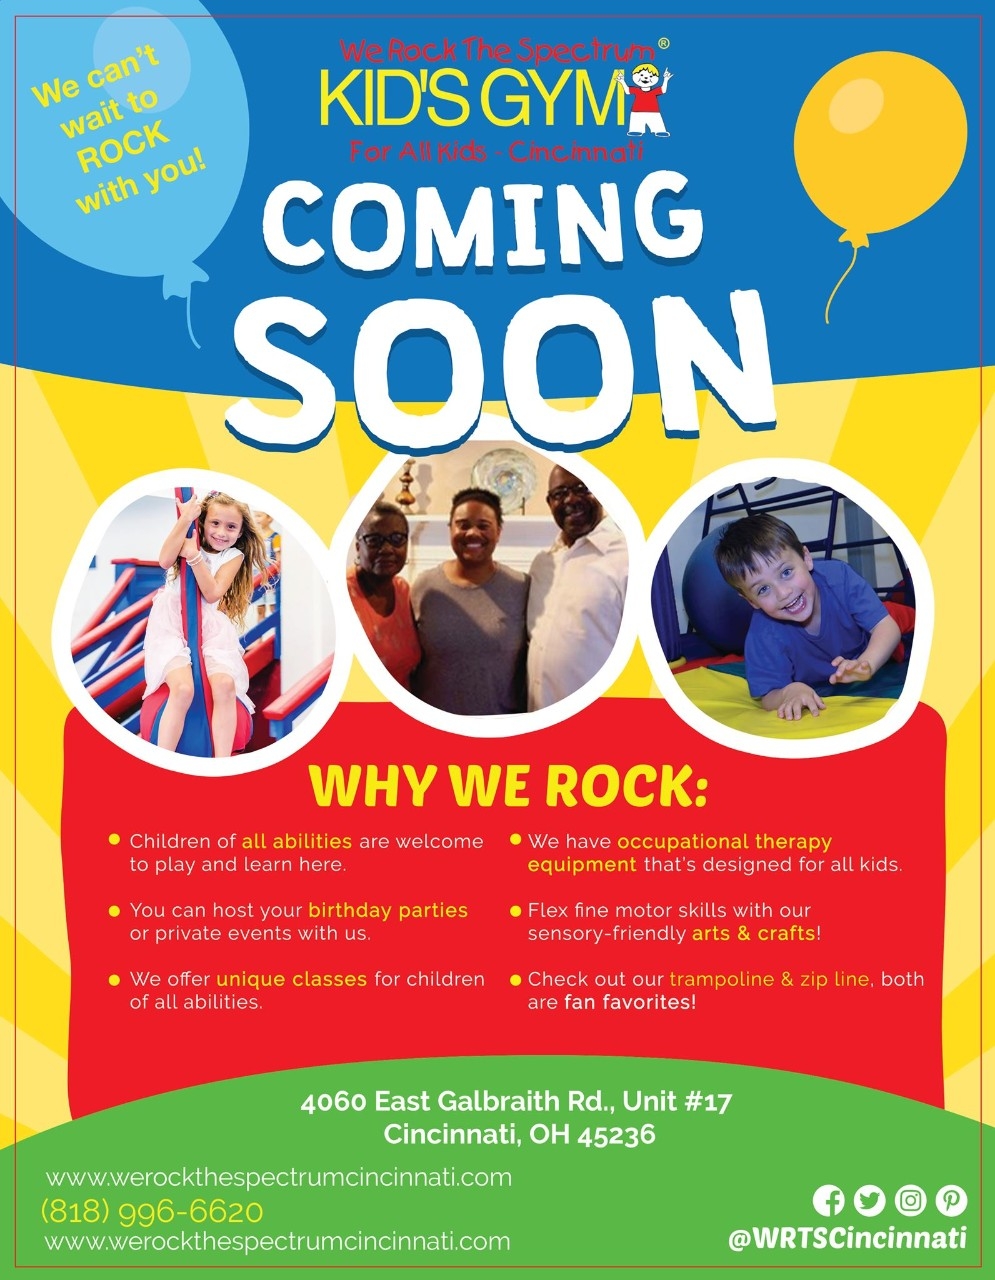 Kid's inclusive gym "coming soon" flyer